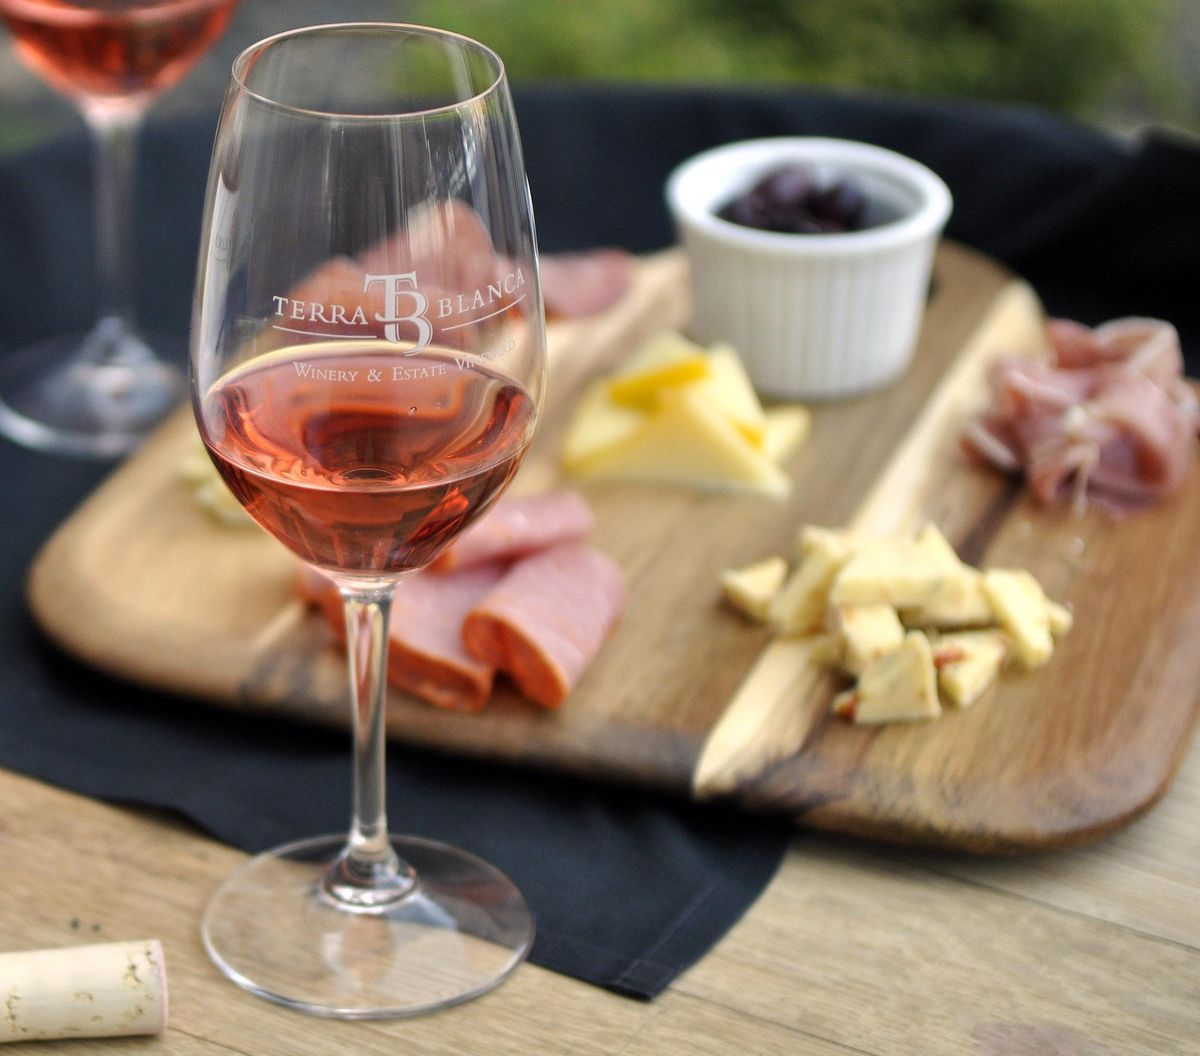 During Spring Release Weekend on Saturday and Sunday, some local wineries will be offering appetizers as well as music, specials and extended hours. (Adriana Janovich / The Spokesman-Review)